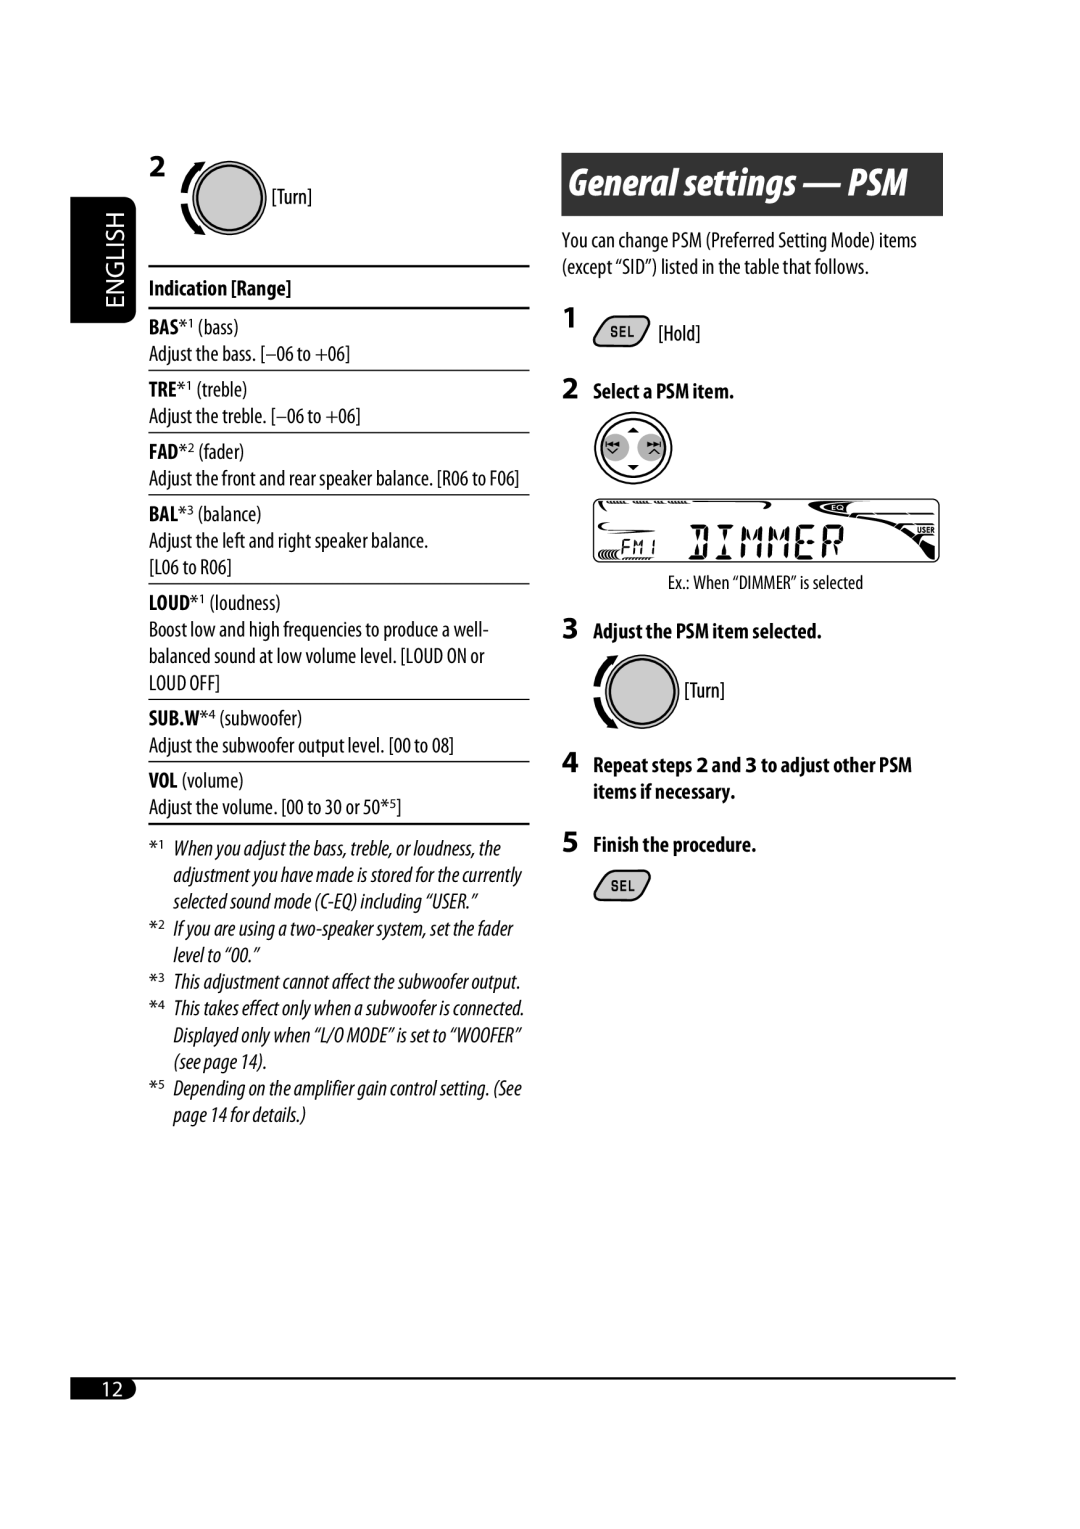 JVC KD-S33 manual Indication Range, 2Select a PSM item, 3Adjust the PSM item selected, 5Finish the procedure, English 